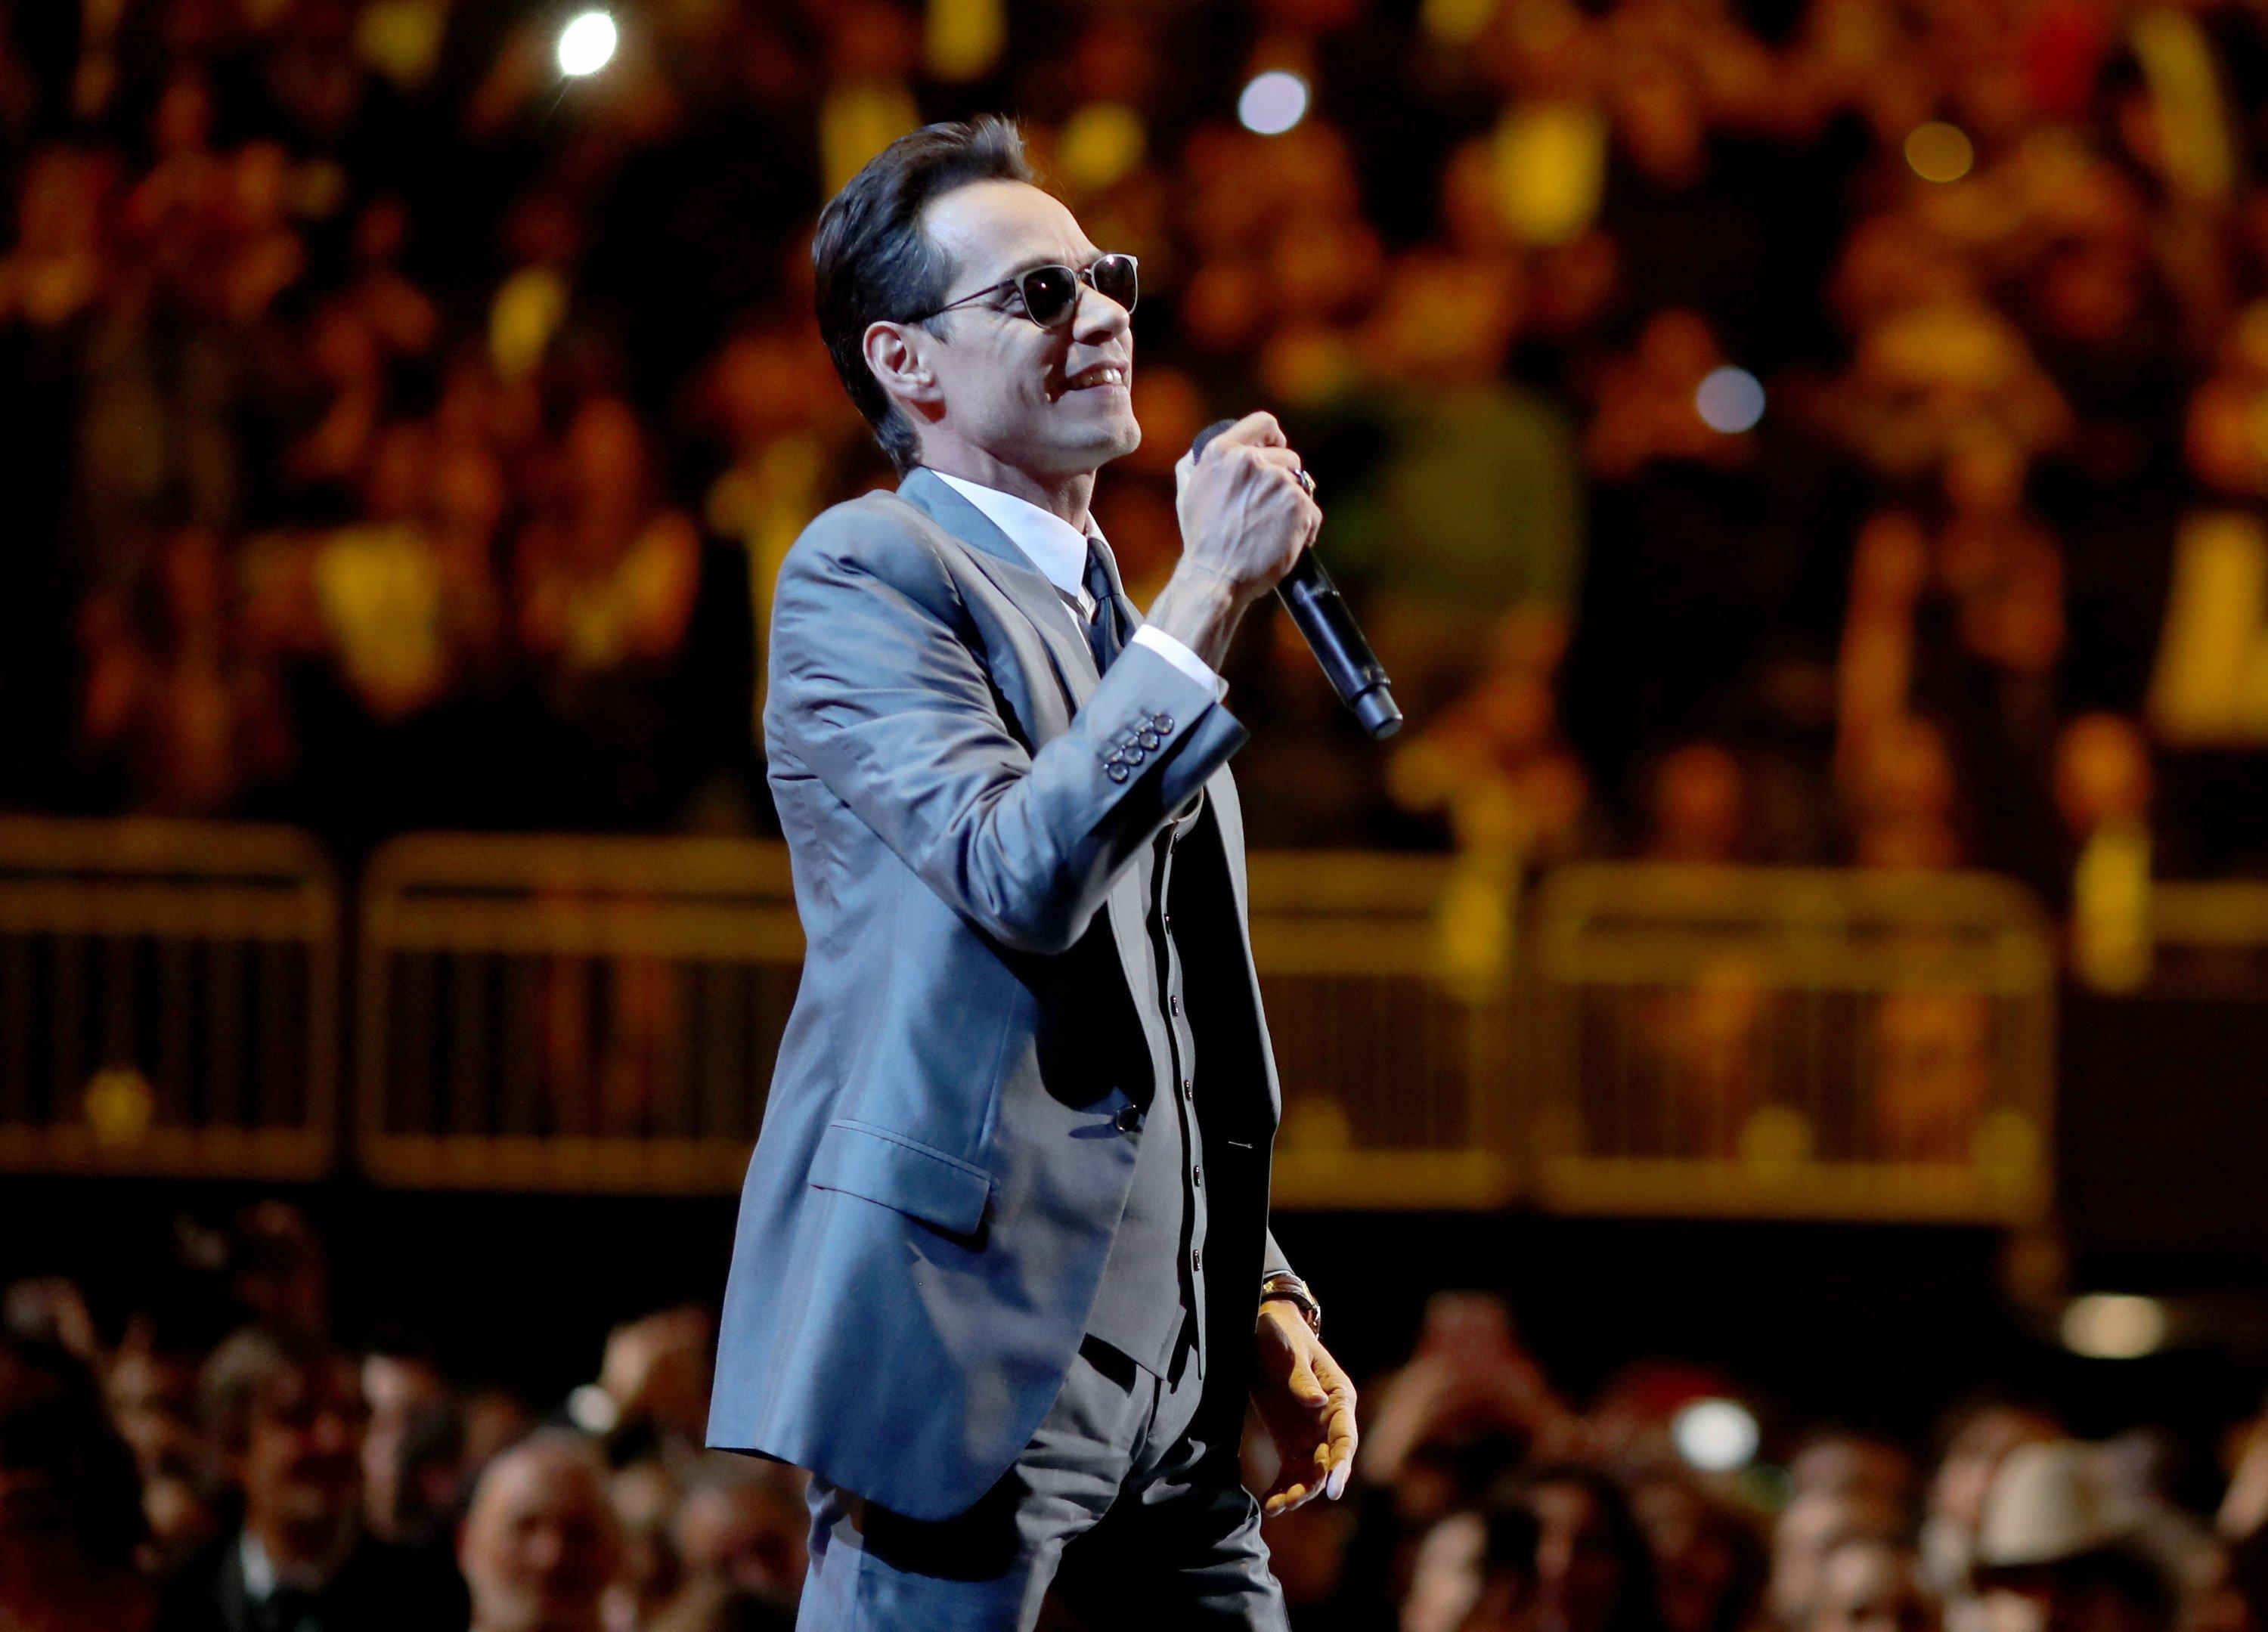 Marc Anthony at 17th Latin GRAMMY Awards in 2016